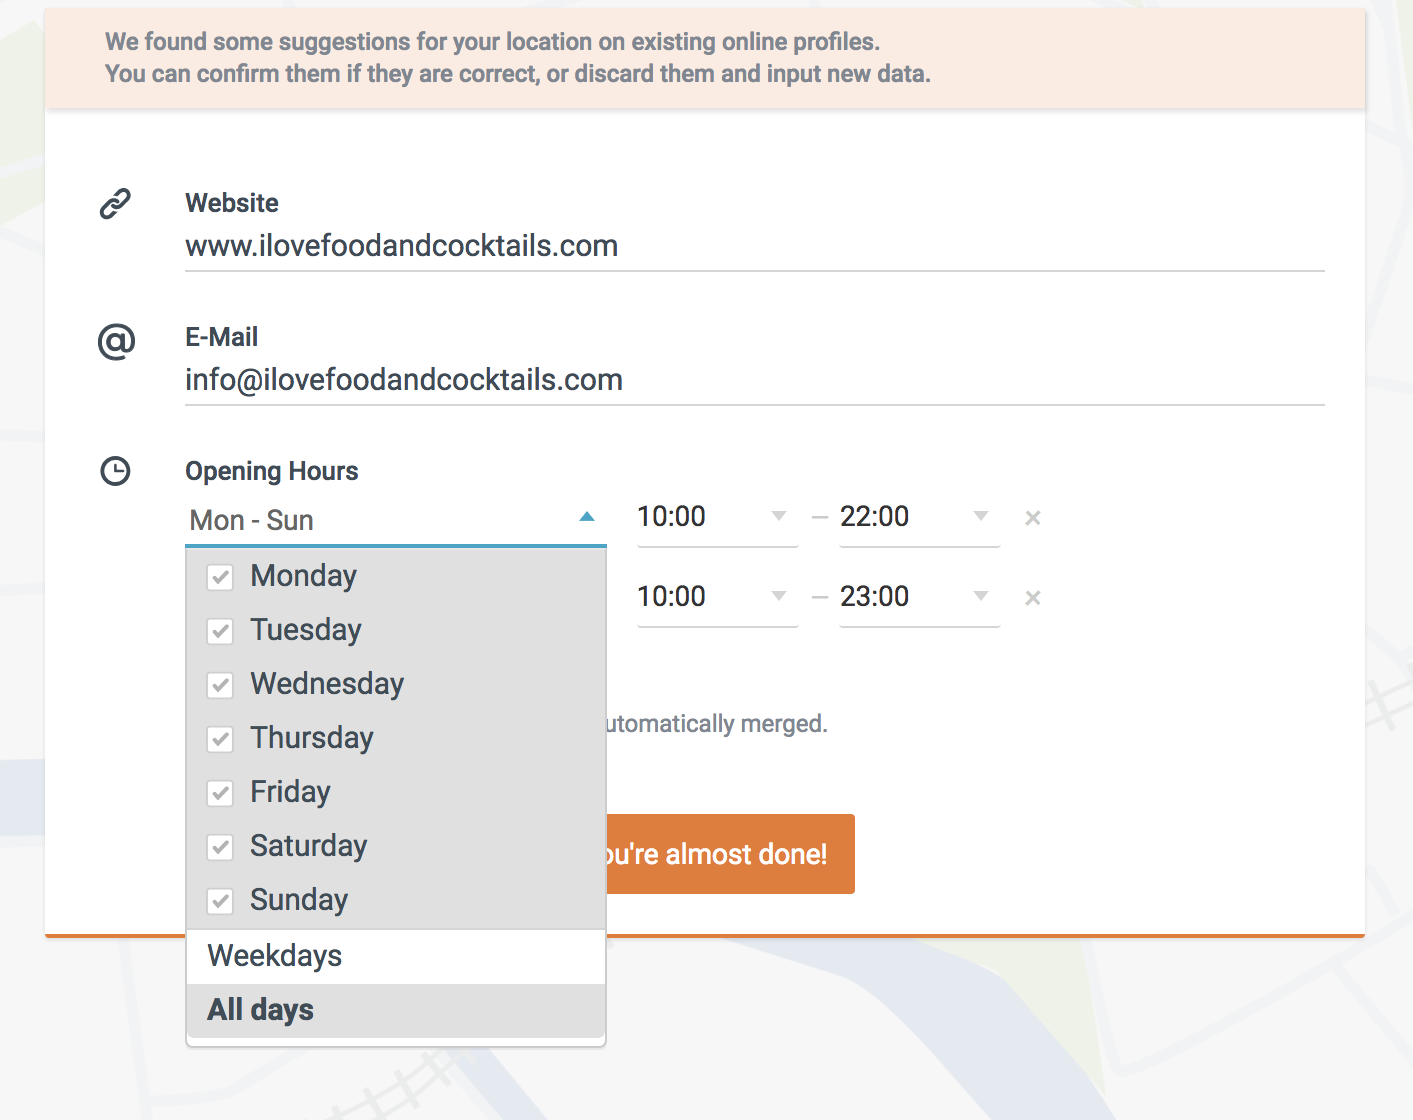 Display of operating hours days email and website fields to set up your online business listing